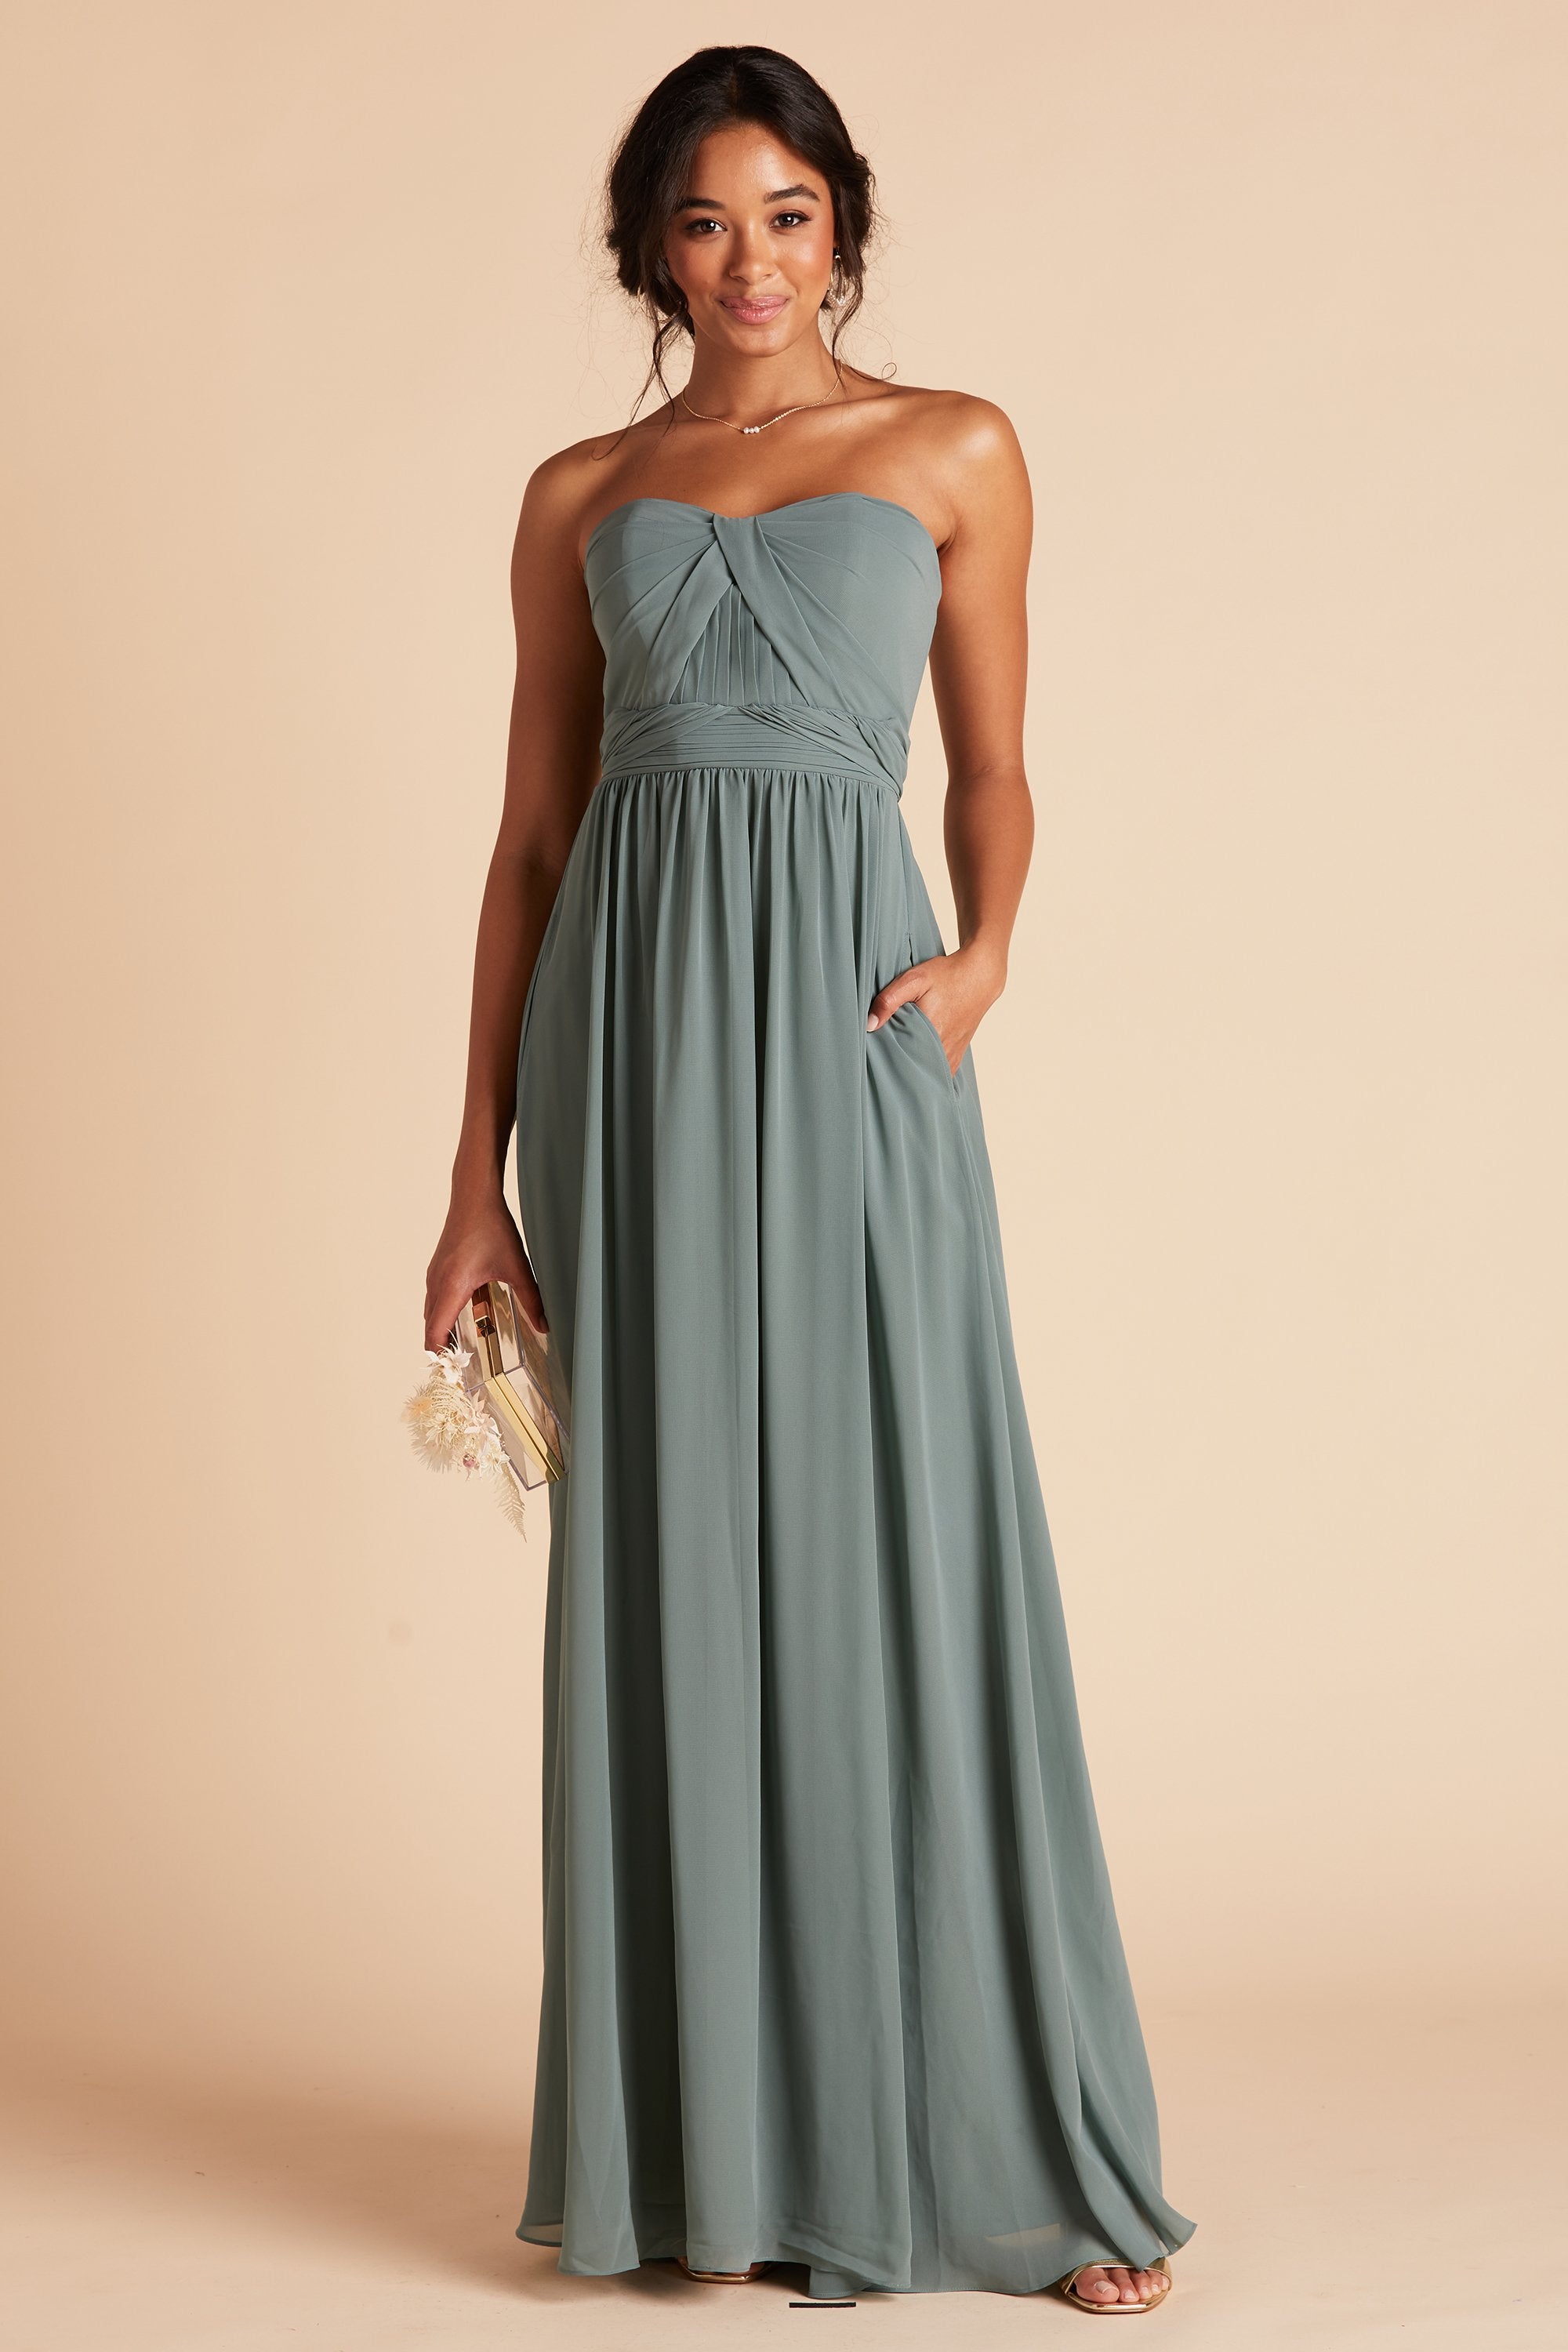 Front view of the floor-length Grace Convertible Bridesmaid Dress in sea glass chiffon as the model rests her left hand in the hidden side pocket.